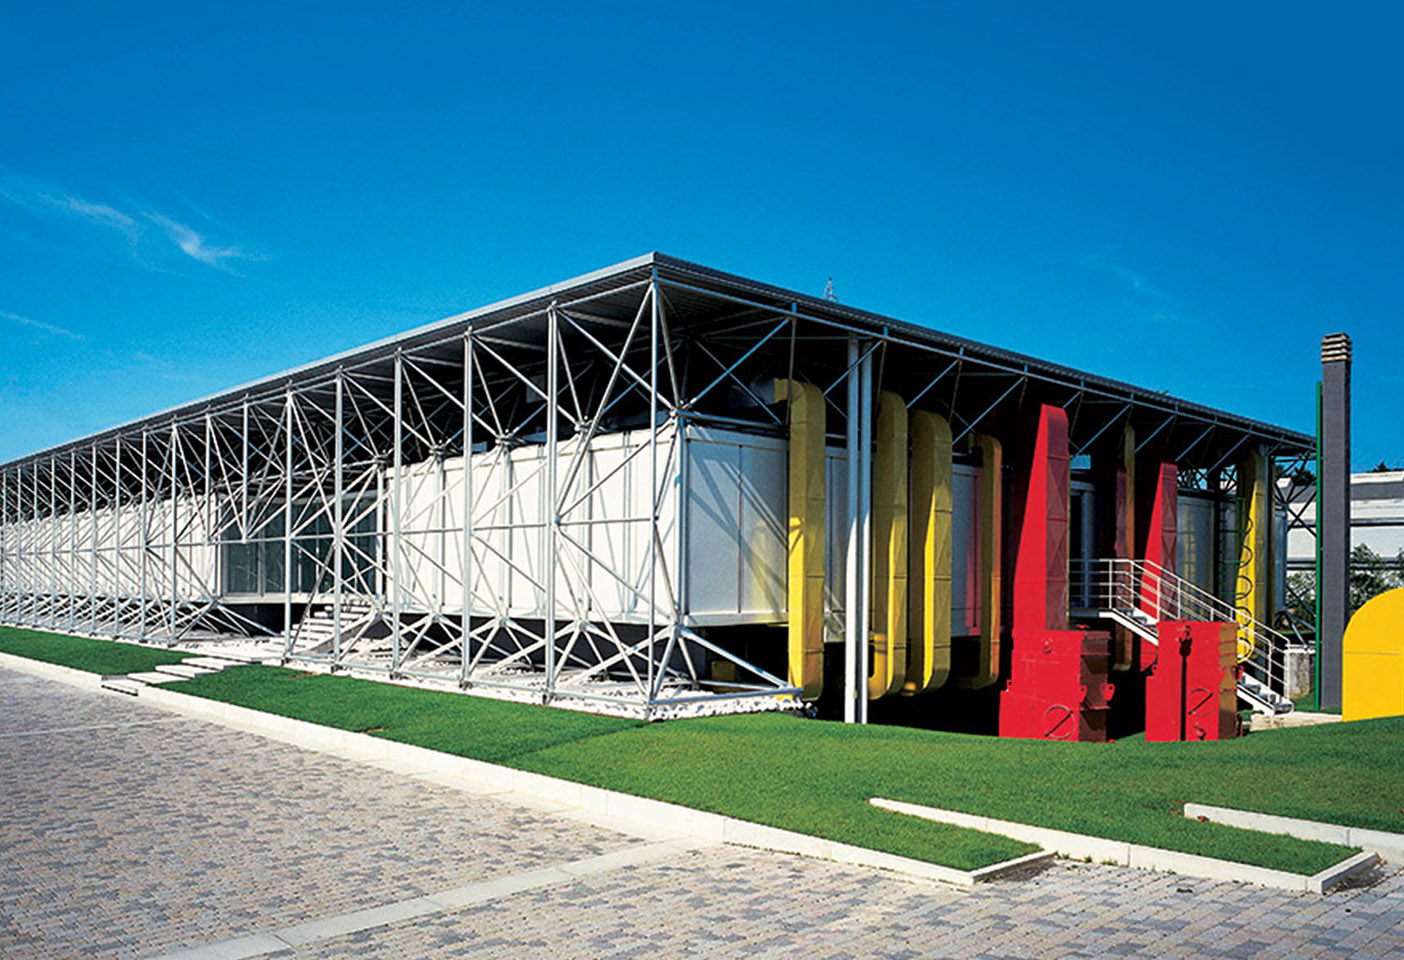 B&B Italia's iconic headquarters near Lake Como in Italy was designed by Renzo Piano and Richard Rogers, and completed in 1972 while the architects were also working on the Centre Pompidou in Paris. Photo c/o B&B Italia. 